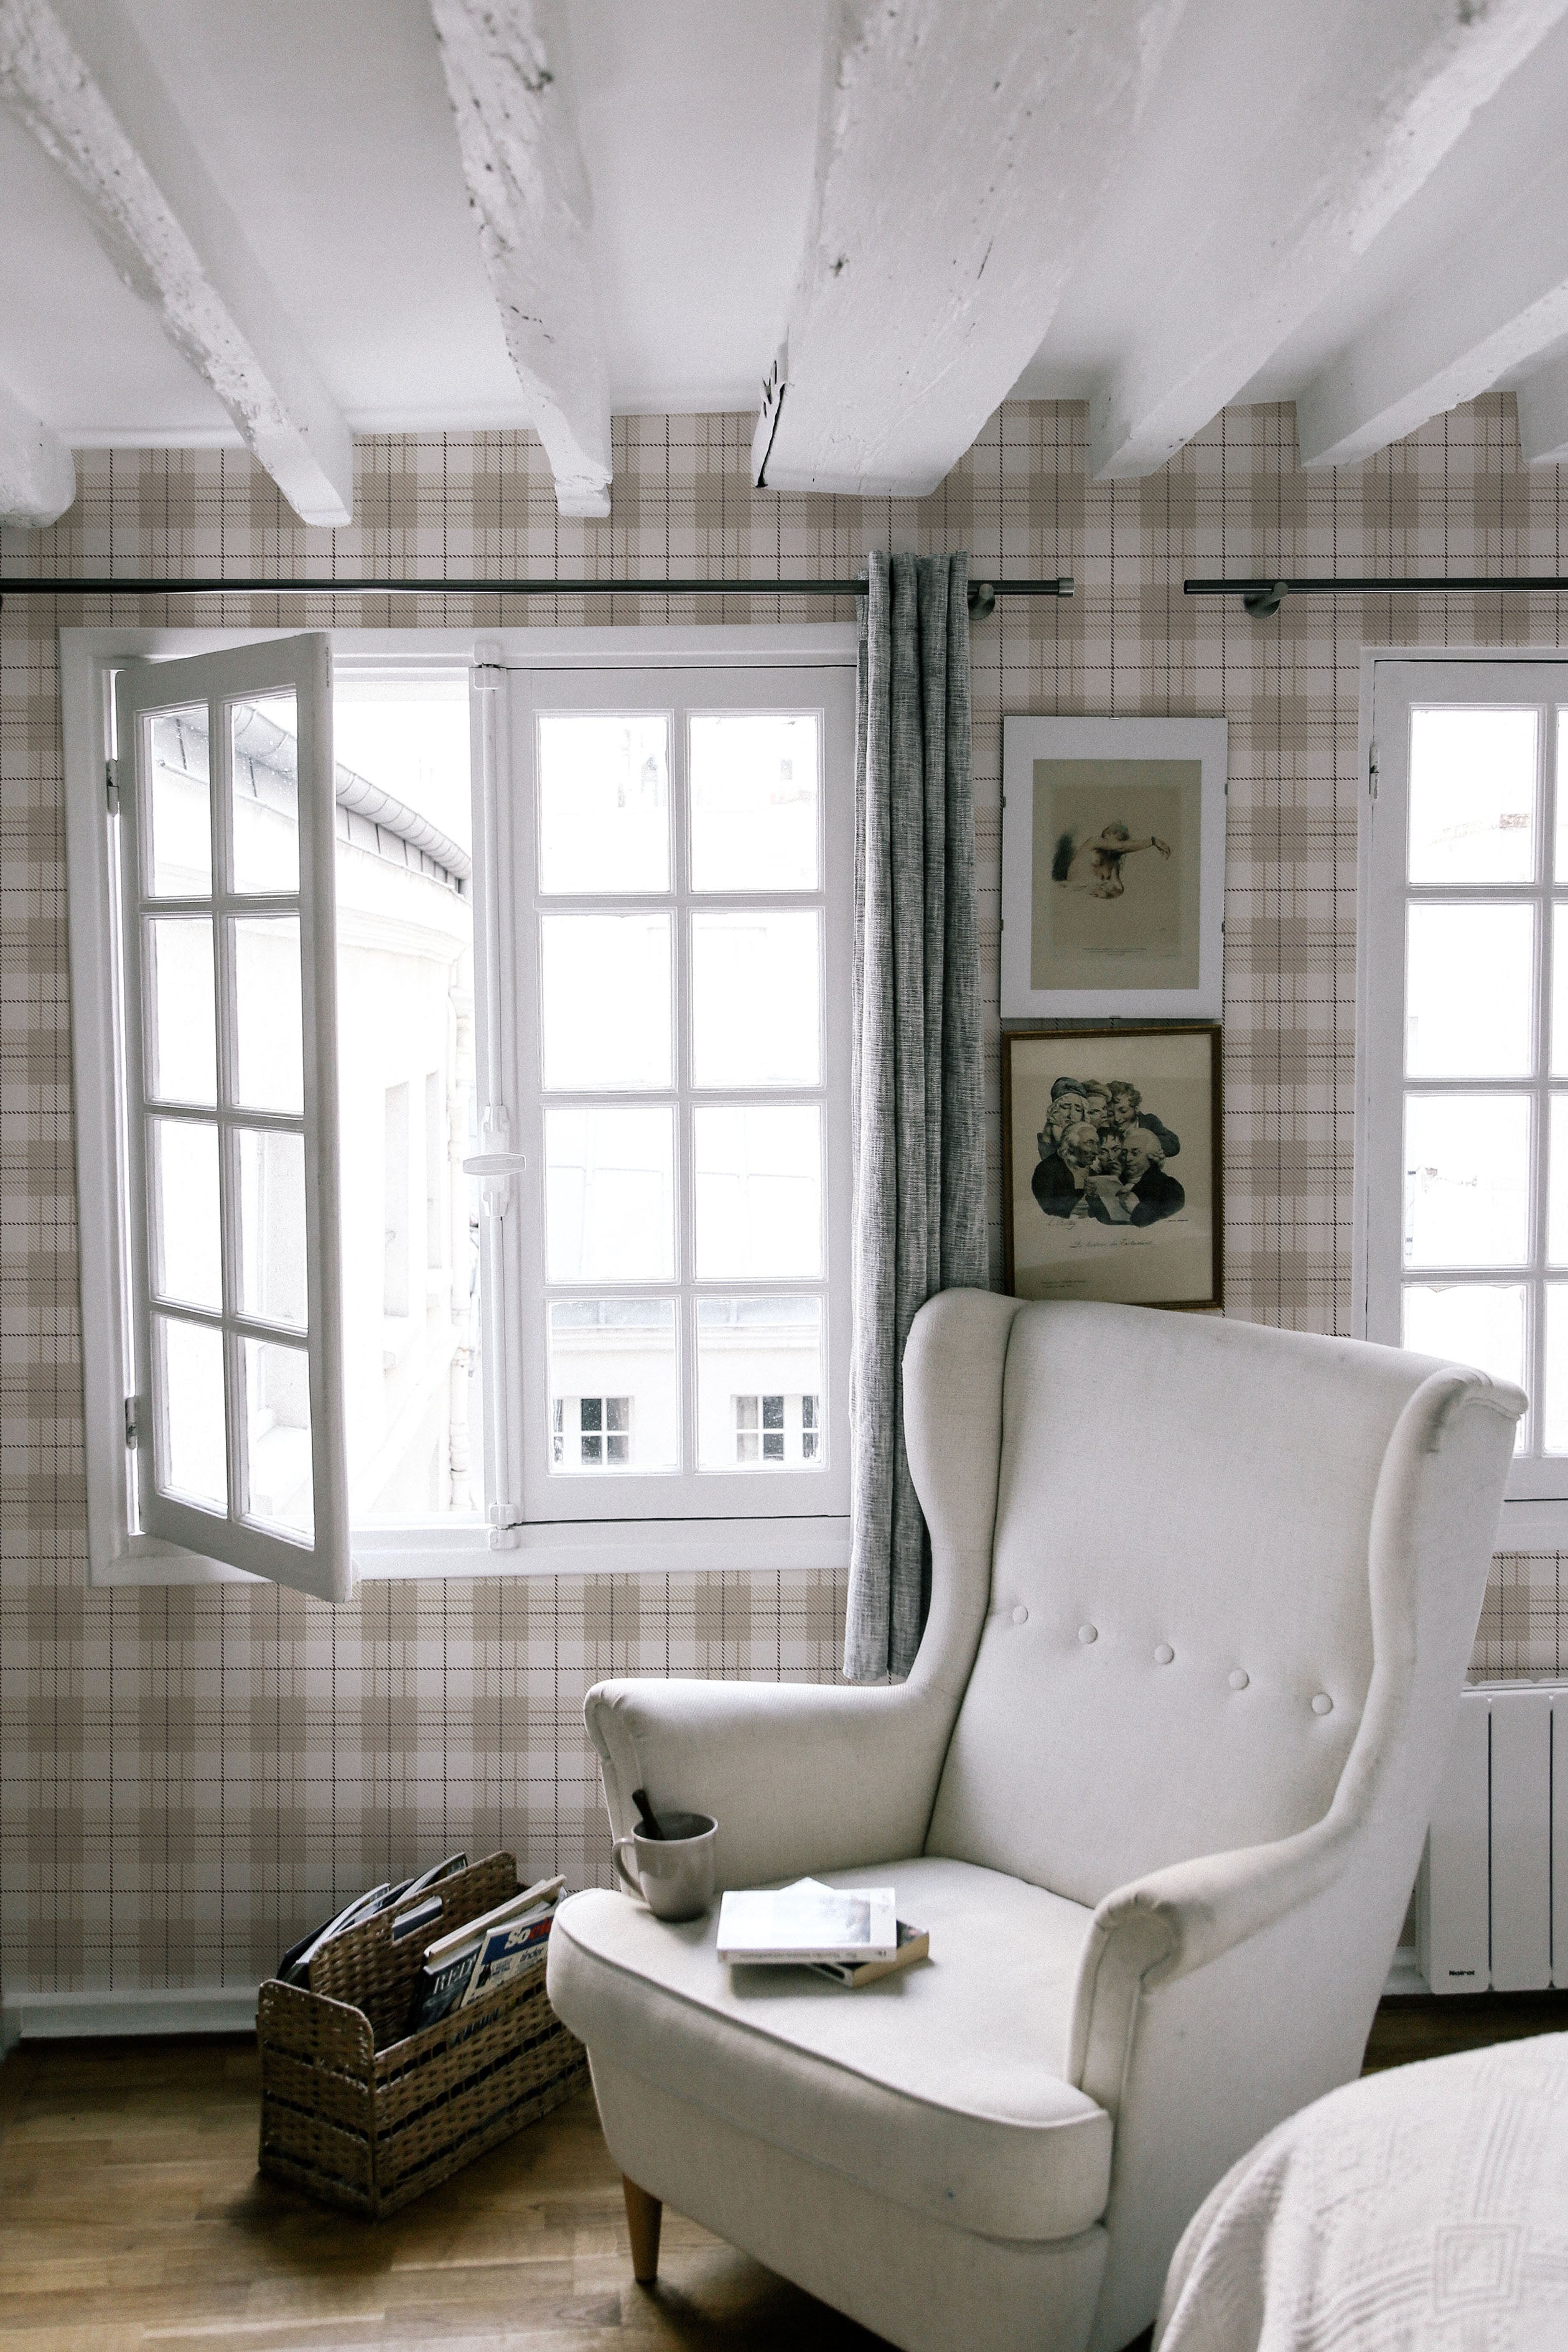 A cozy reading nook illuminated by natural light from large windows, with an elegant wingback chair set against the Winter Plaid Wallpaper. The room's plaid-patterned walls give a feeling of comfort and nostalgia, enhanced by the room's rustic wooden floors and classic decor.